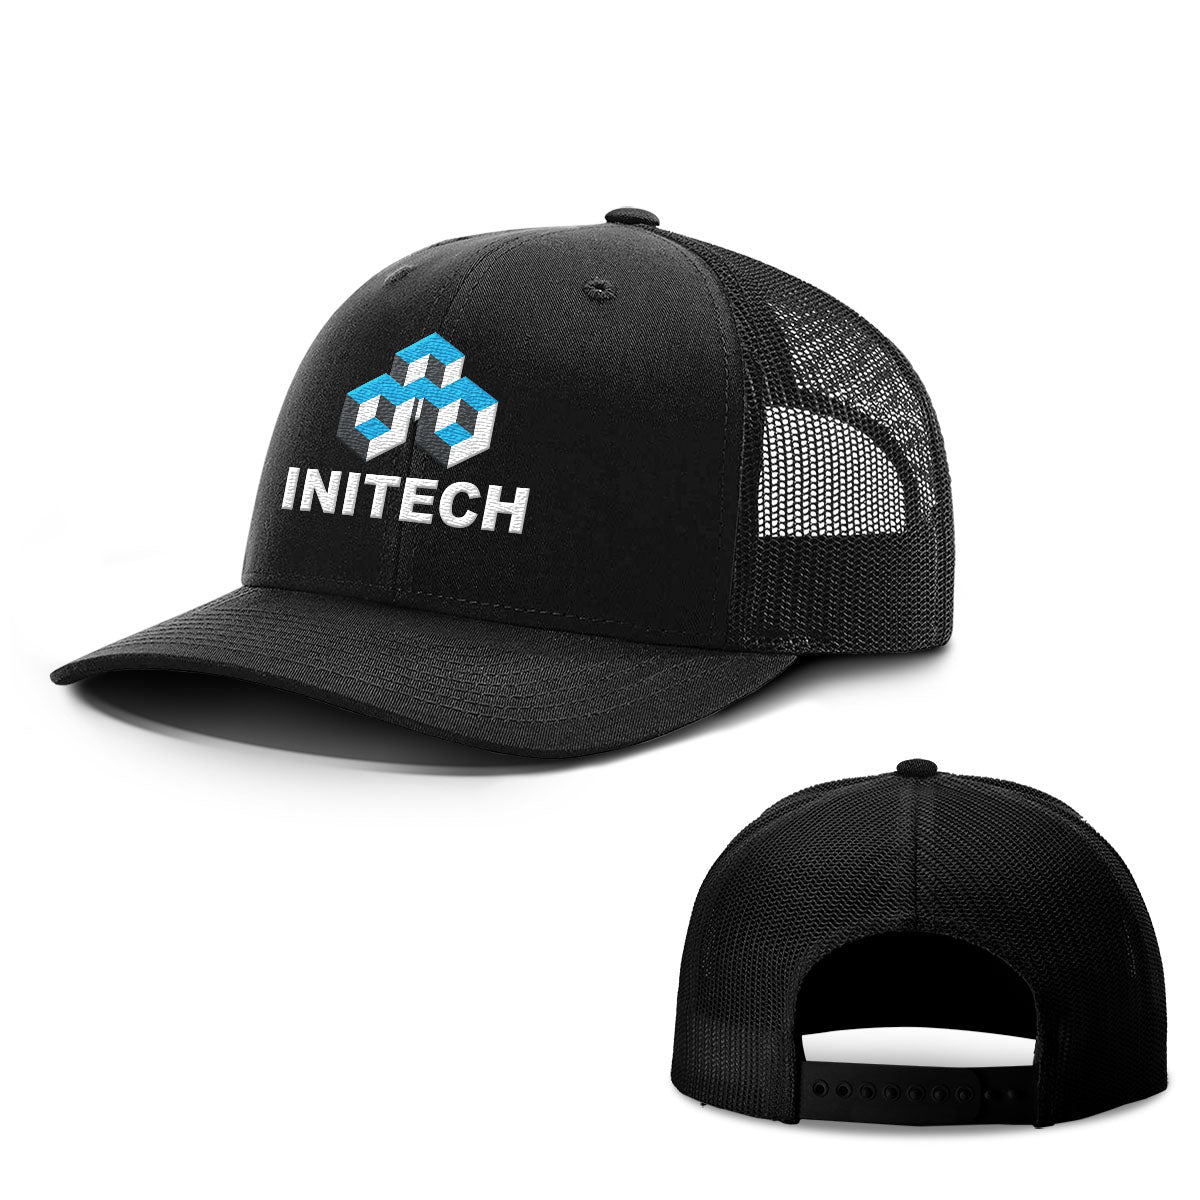 Initech Hats - BustedTees.com